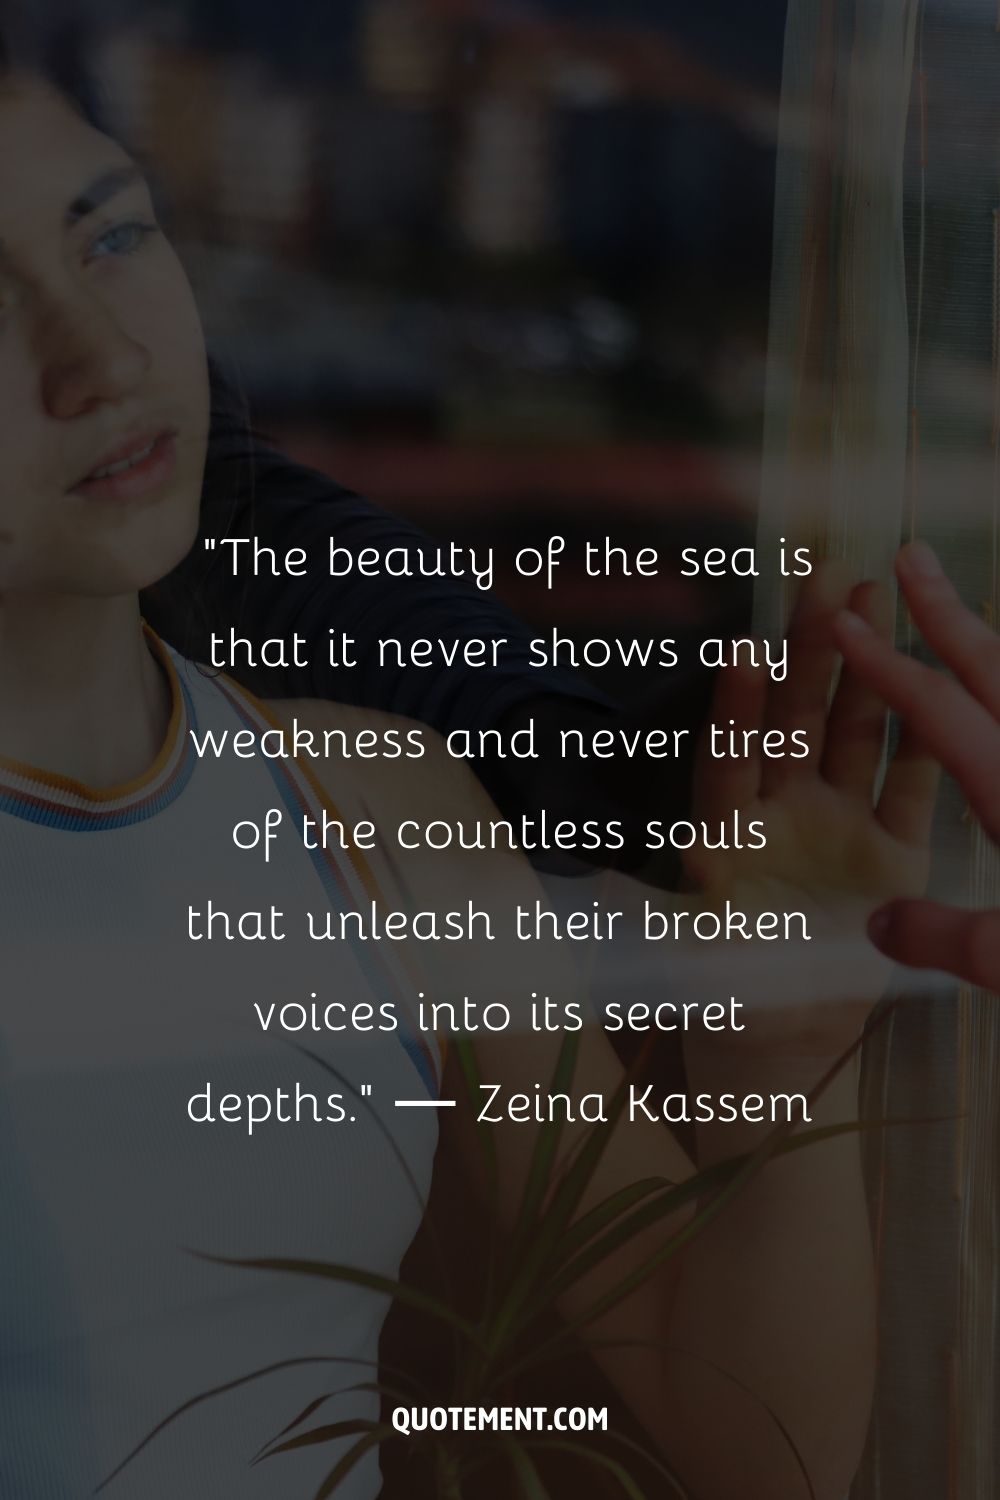 The beauty of the sea is that it never shows any weakness and never tires of the countless souls that unleash their broken voices into its secret depths